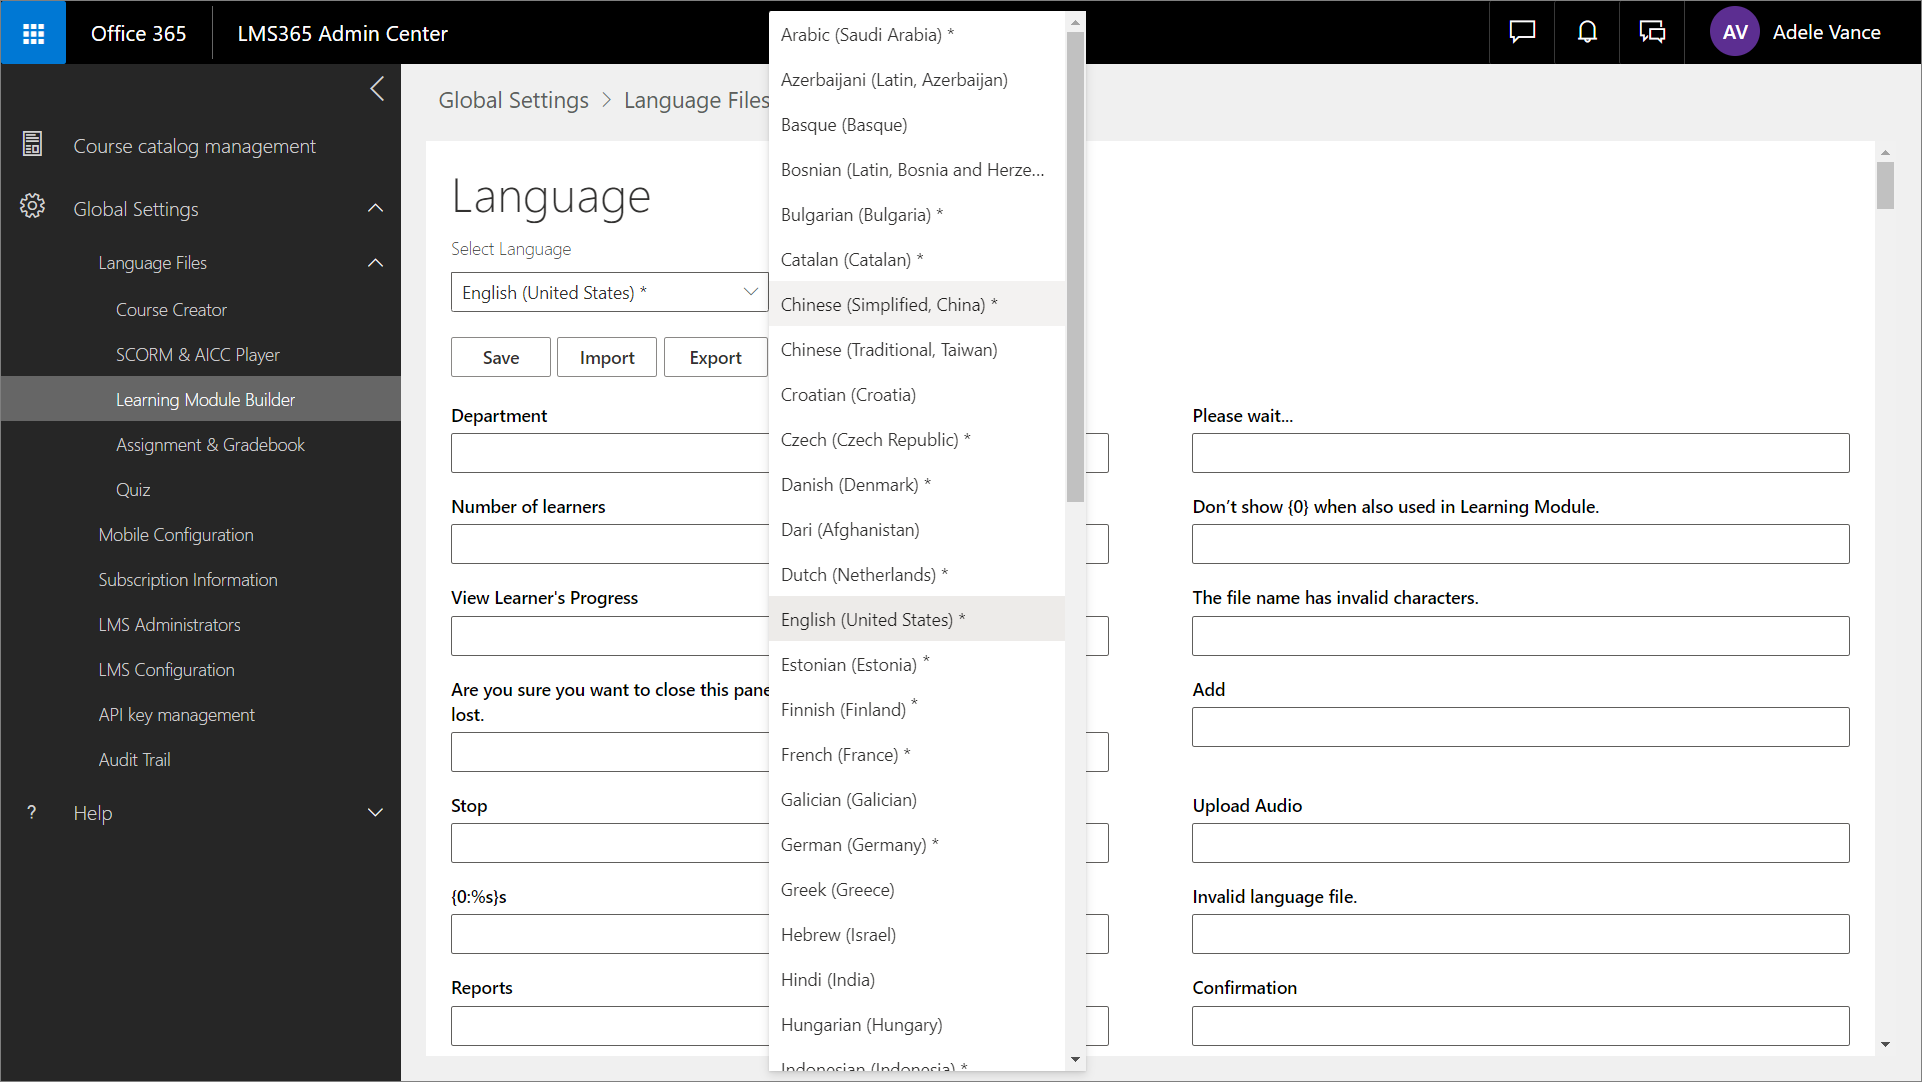 Select_language_dropdown_list_in_the_Language_files